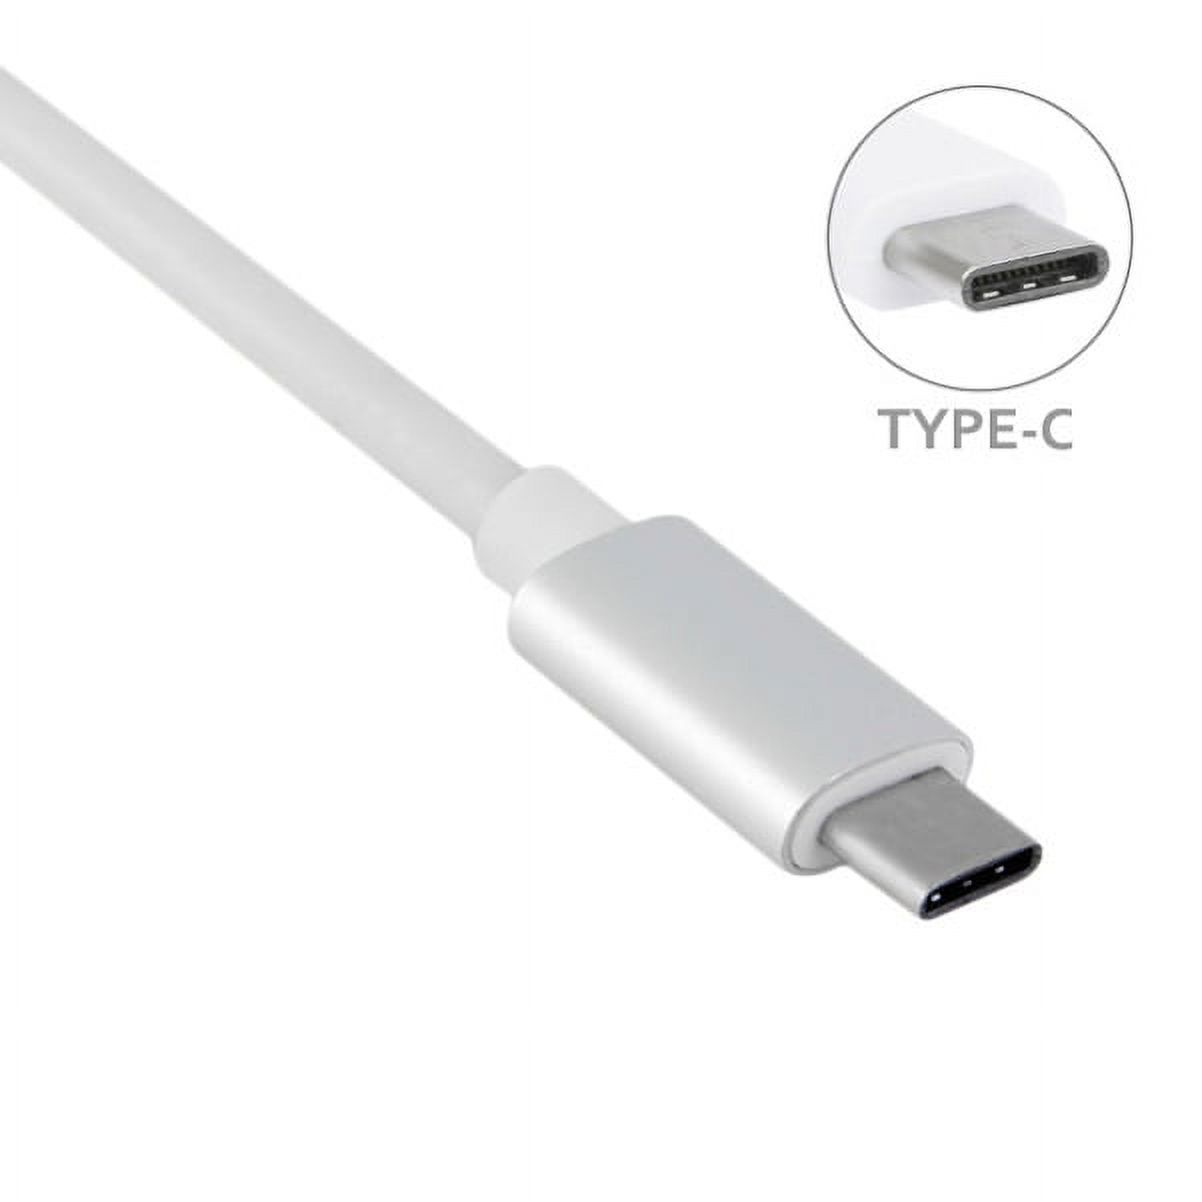 Type-C 10ft USB Cable for Motorola Moto G Pure - Charger Cord Power Wire USB-C Long Fast Charge Sync High Speed White N9K Compatible With Motorola Moto G Pure Phone - image 3 of 3